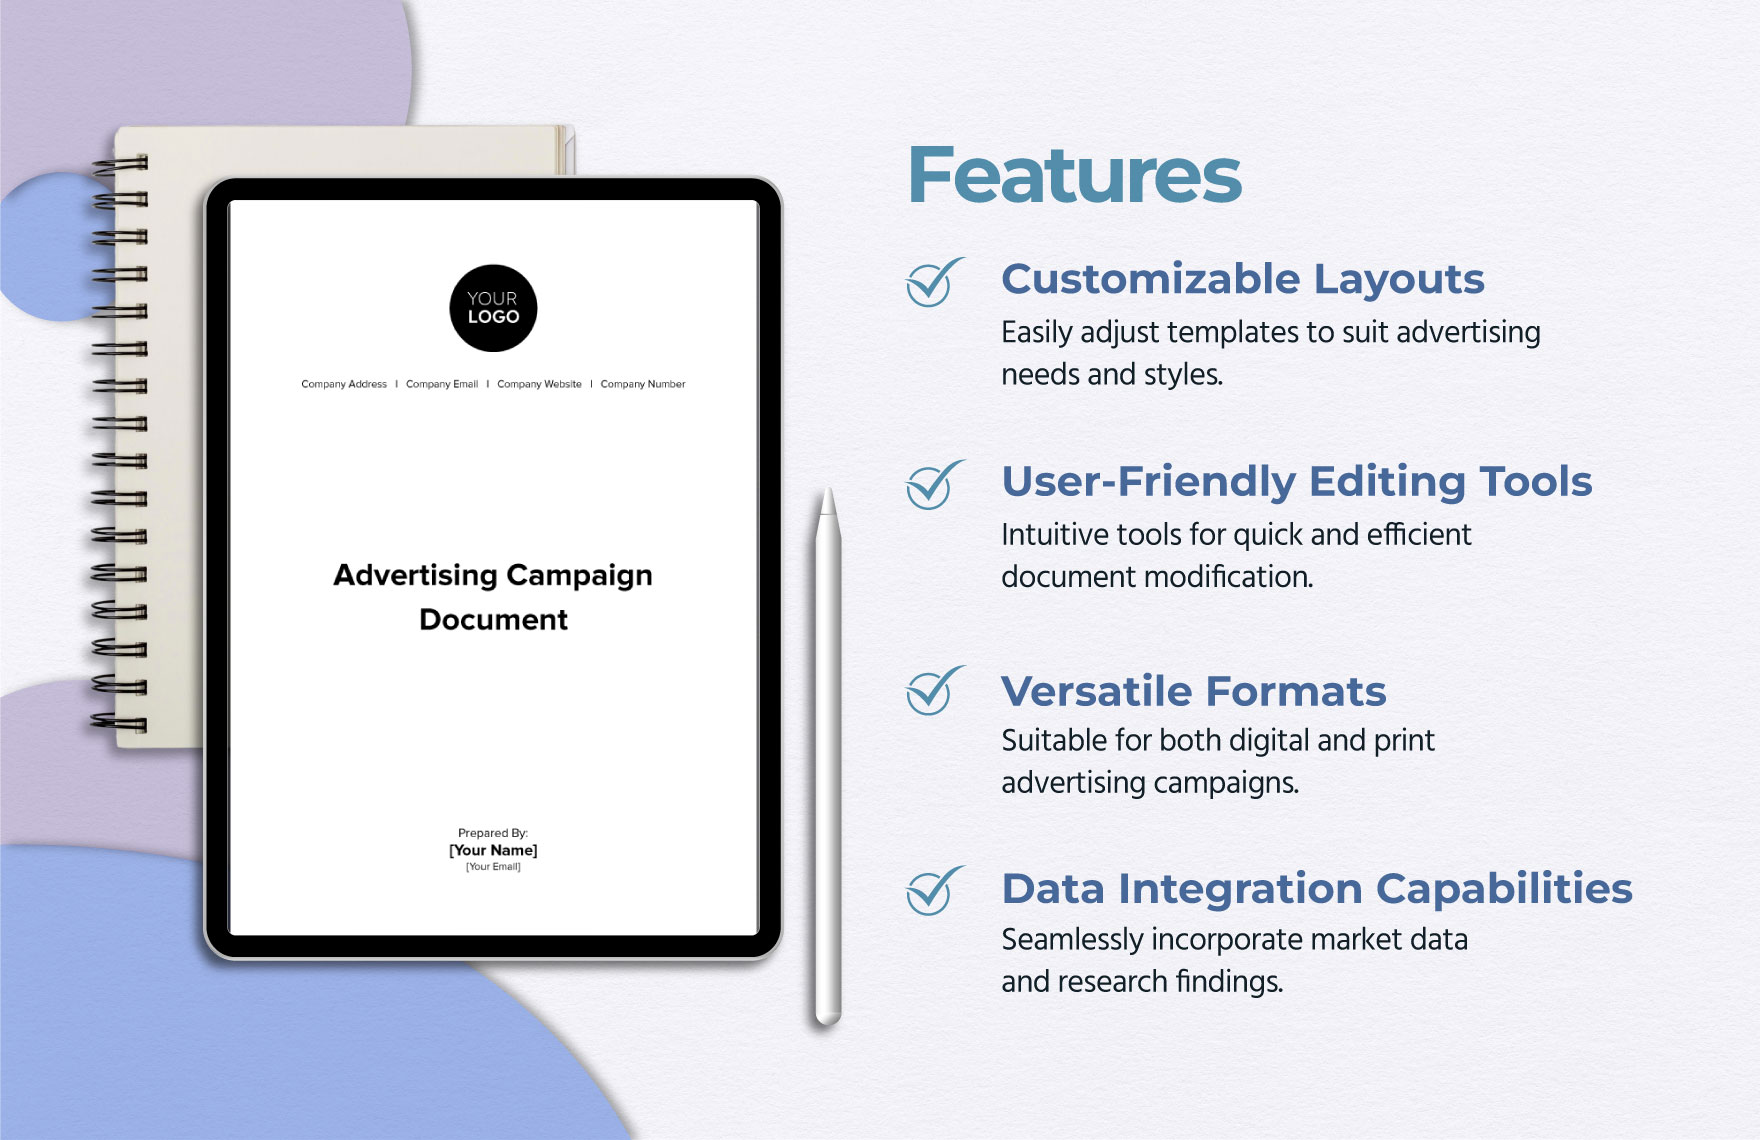 Advertising Campaign Document Template